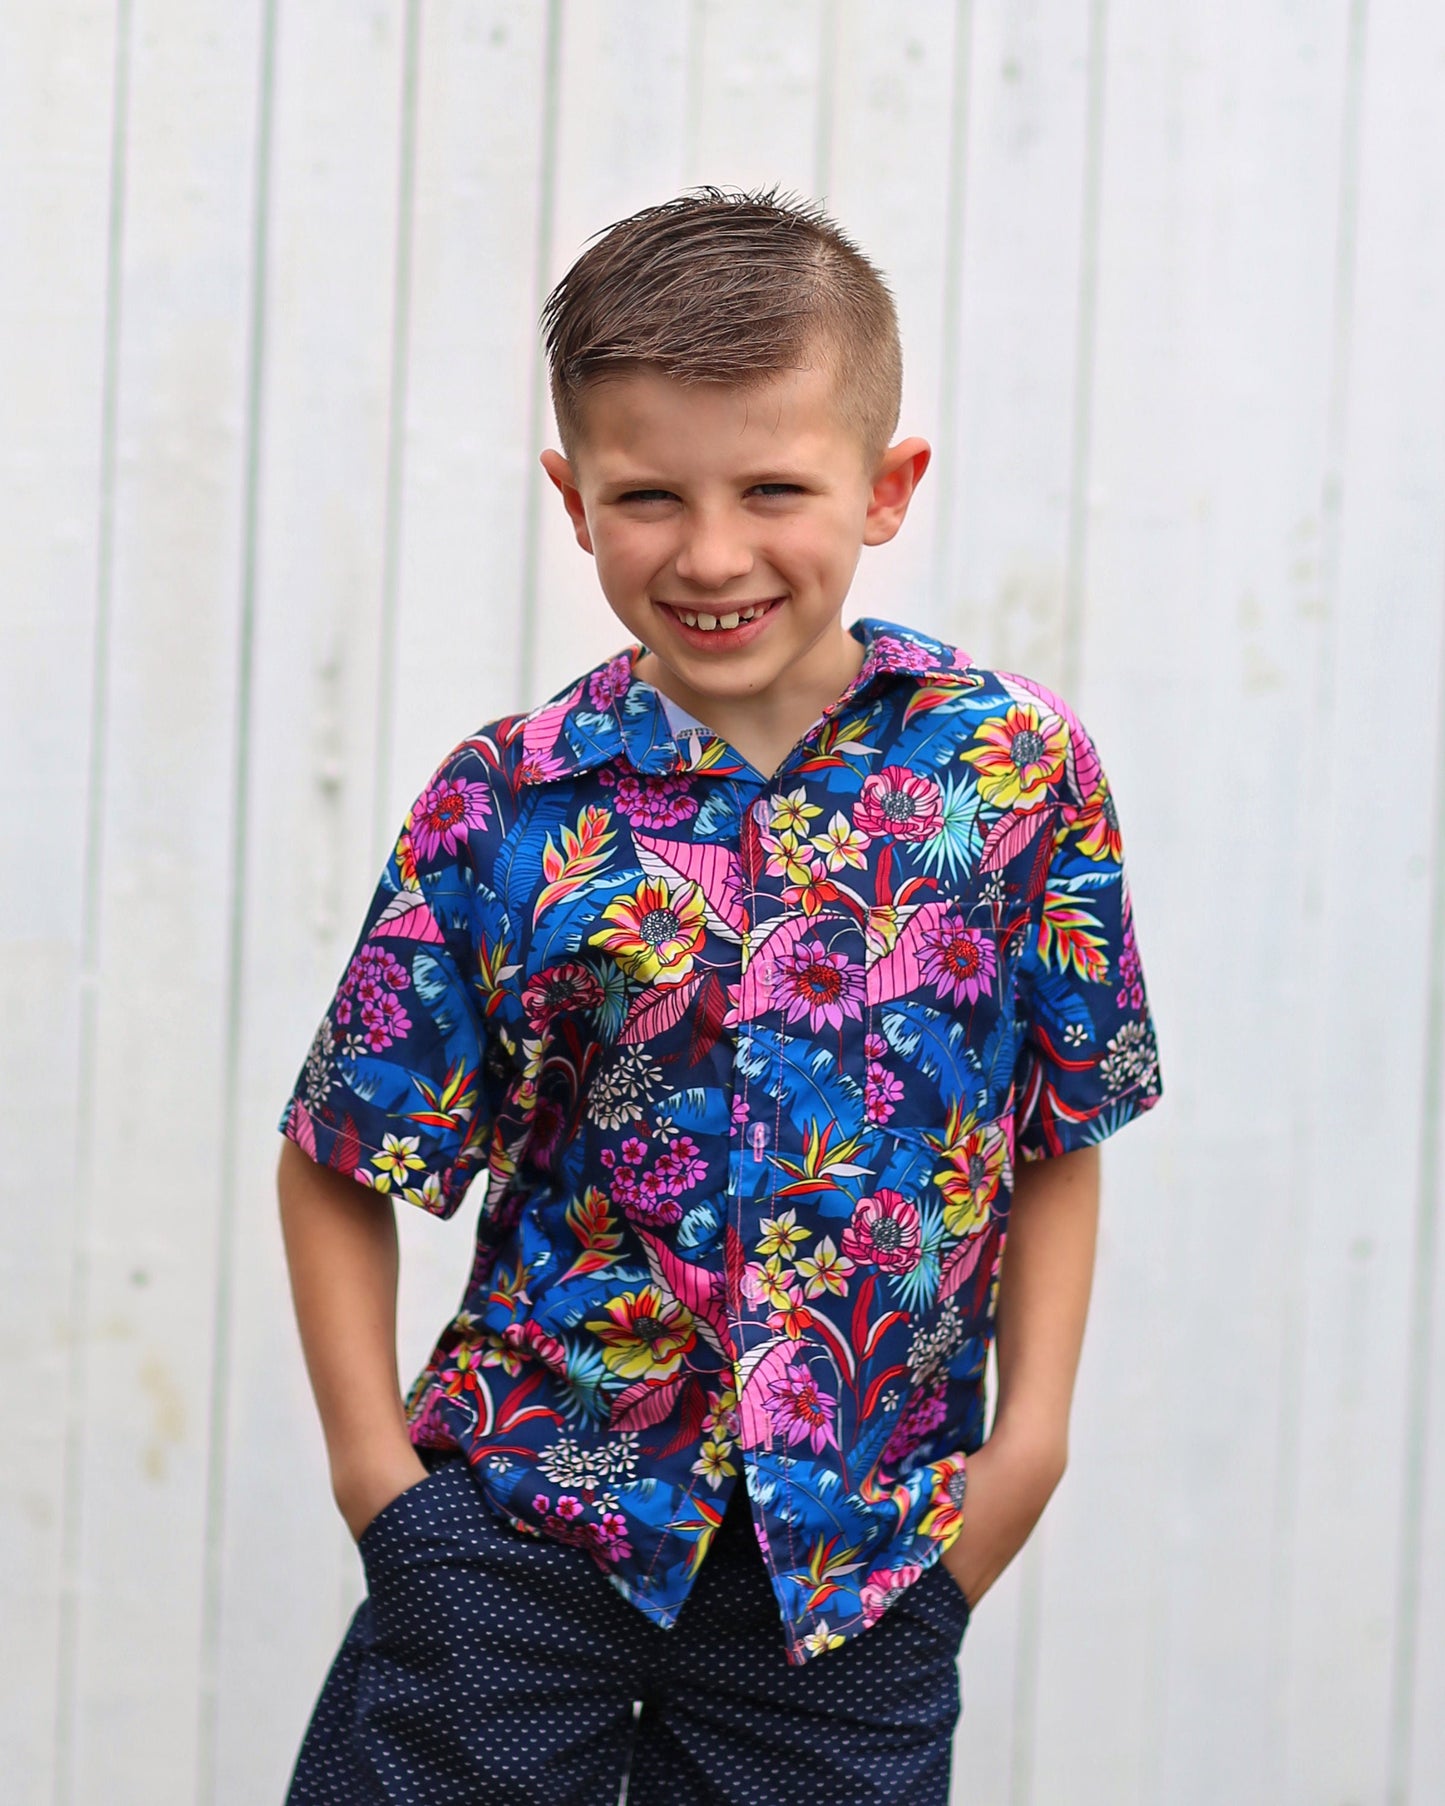 Boys Neon Blue and Pink Floral Button up Shirt - Boys Button Shirt - Boys Dress Shirt